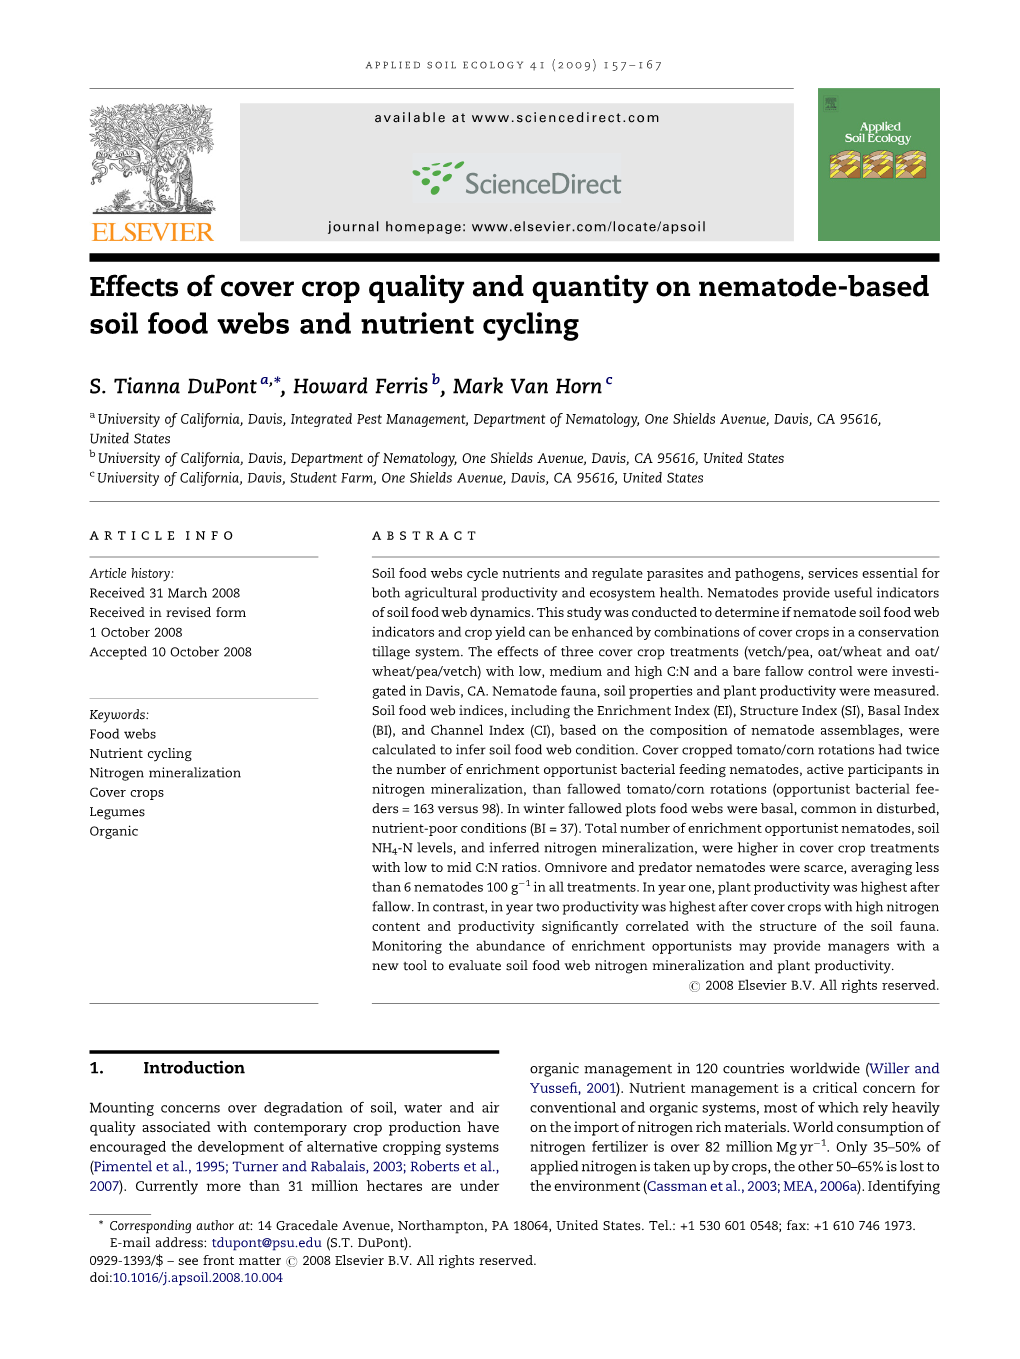 Effects of Cover Crop Quality and Quantity on Nematode-Based Soil Food Webs and Nutrient Cycling